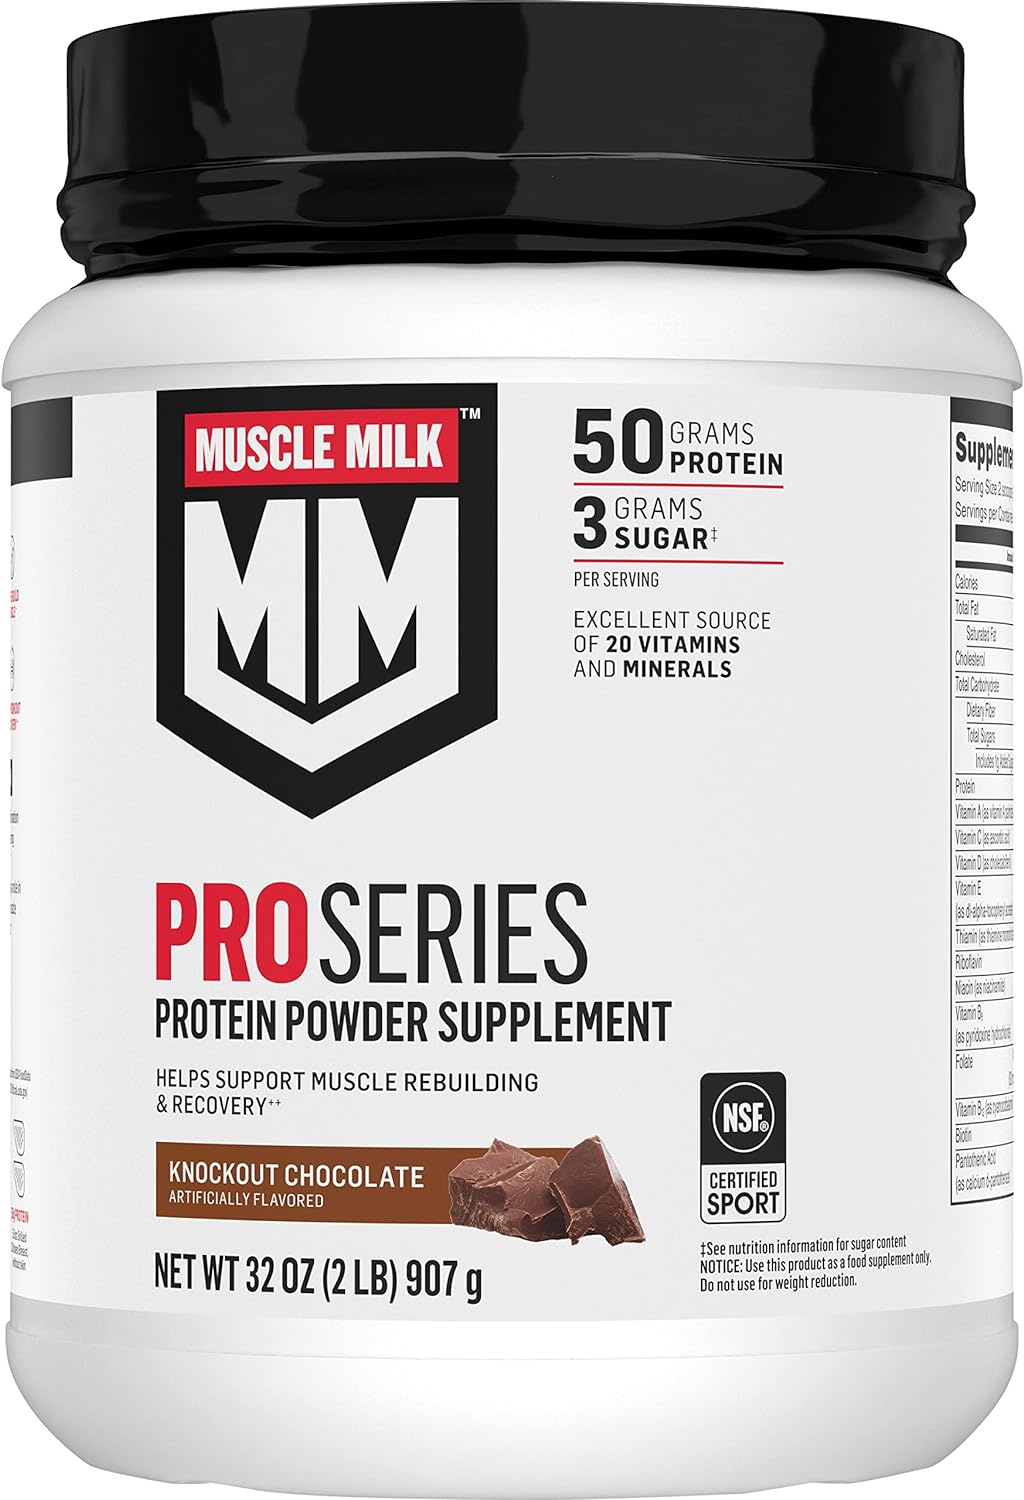 Muscle Milk Pro Series Protein Powder Supplement,Knockout Chocolate,2